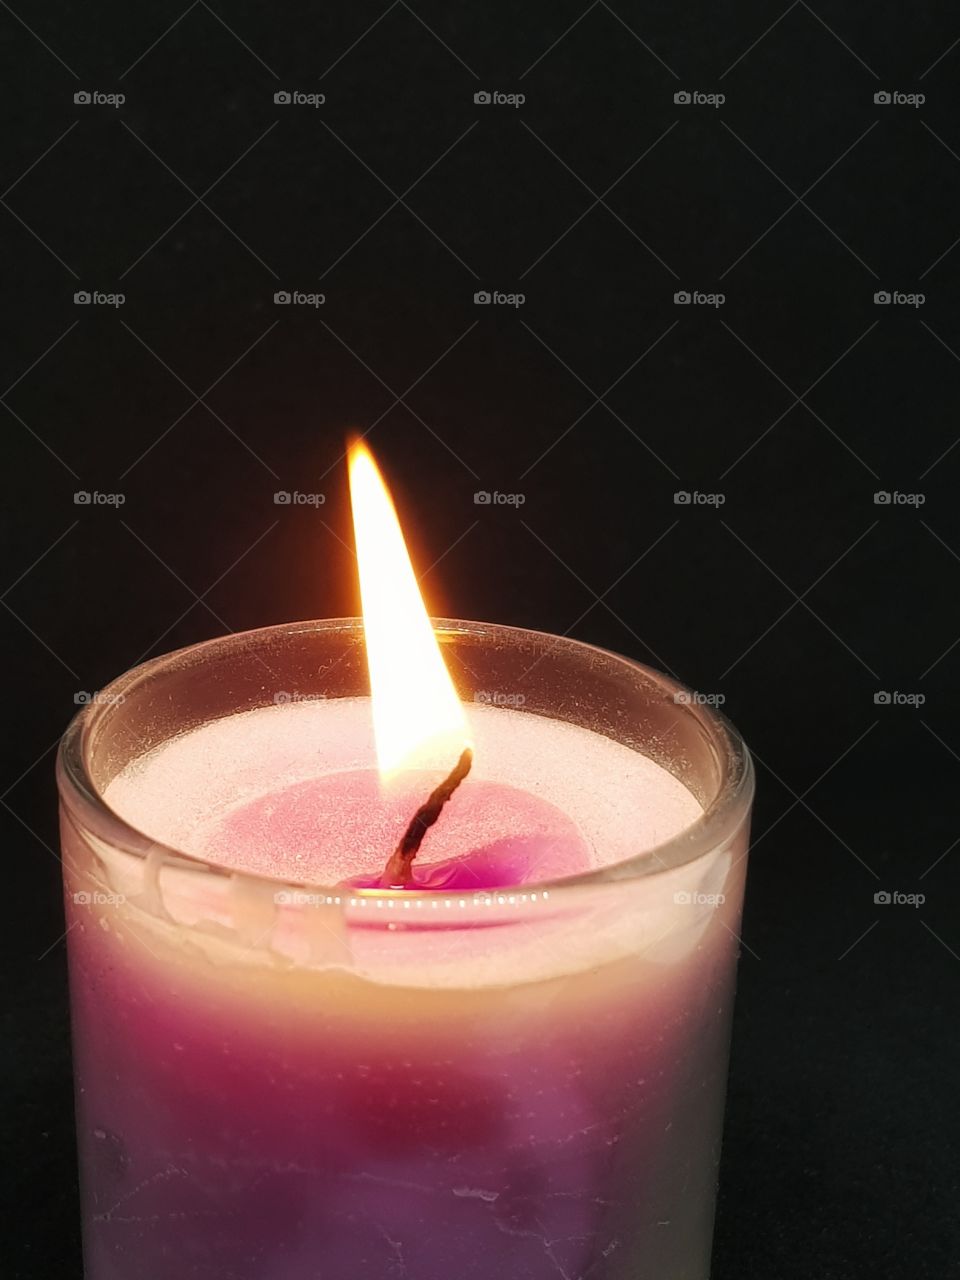 Candlelight in the dark. The outer side of candle is glass and texture colour is pink, white pink.